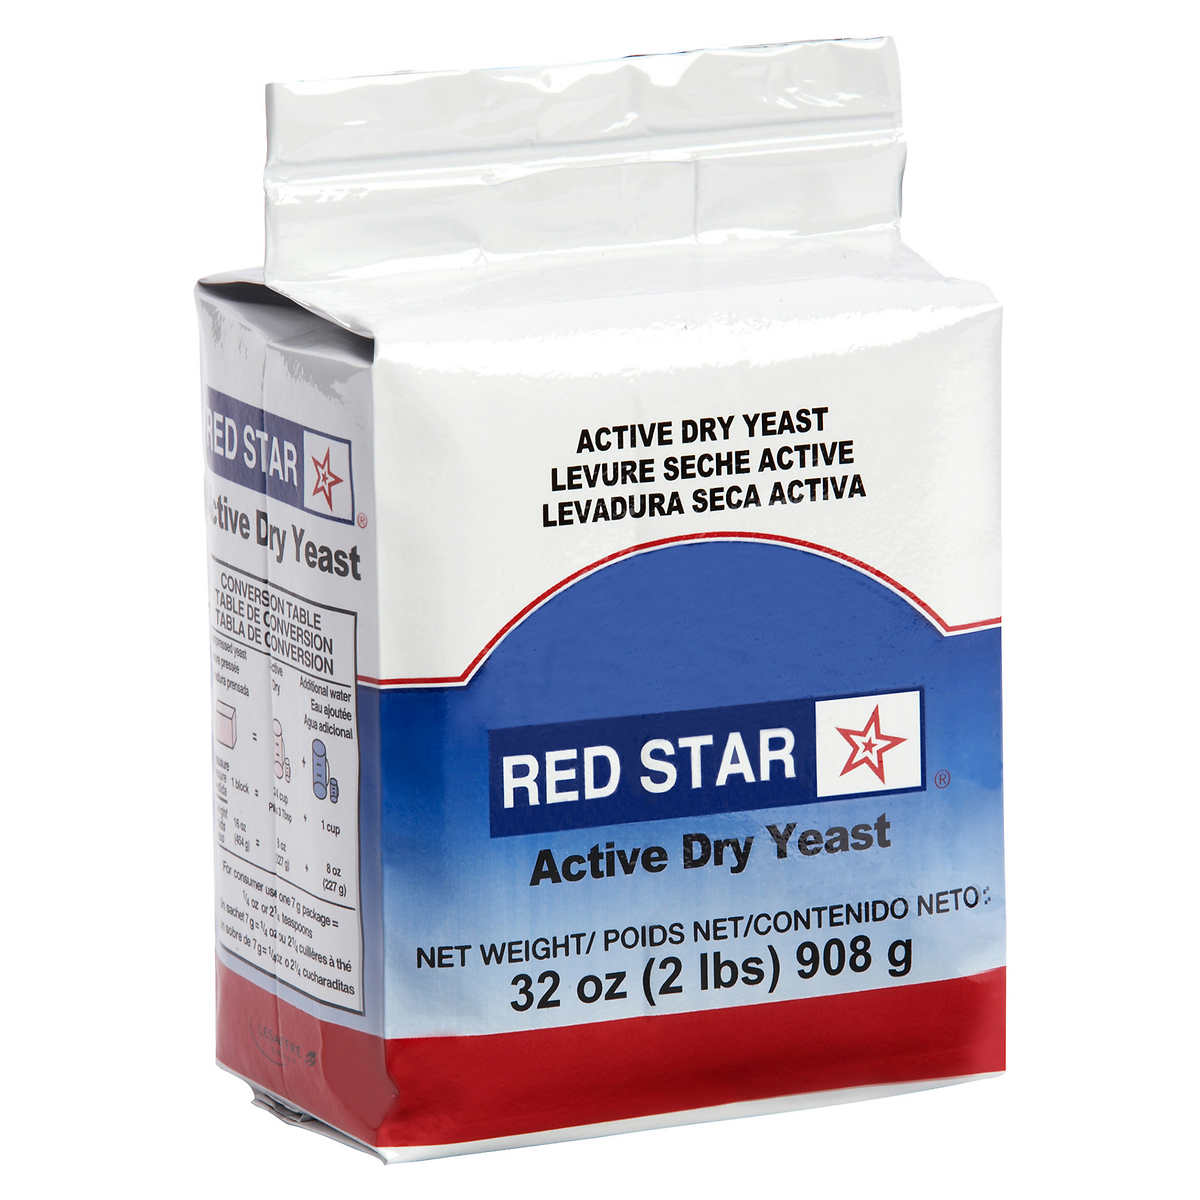 Red Star Original Instant Dry Quick Rise Yeast - Shop Yeast at H-E-B